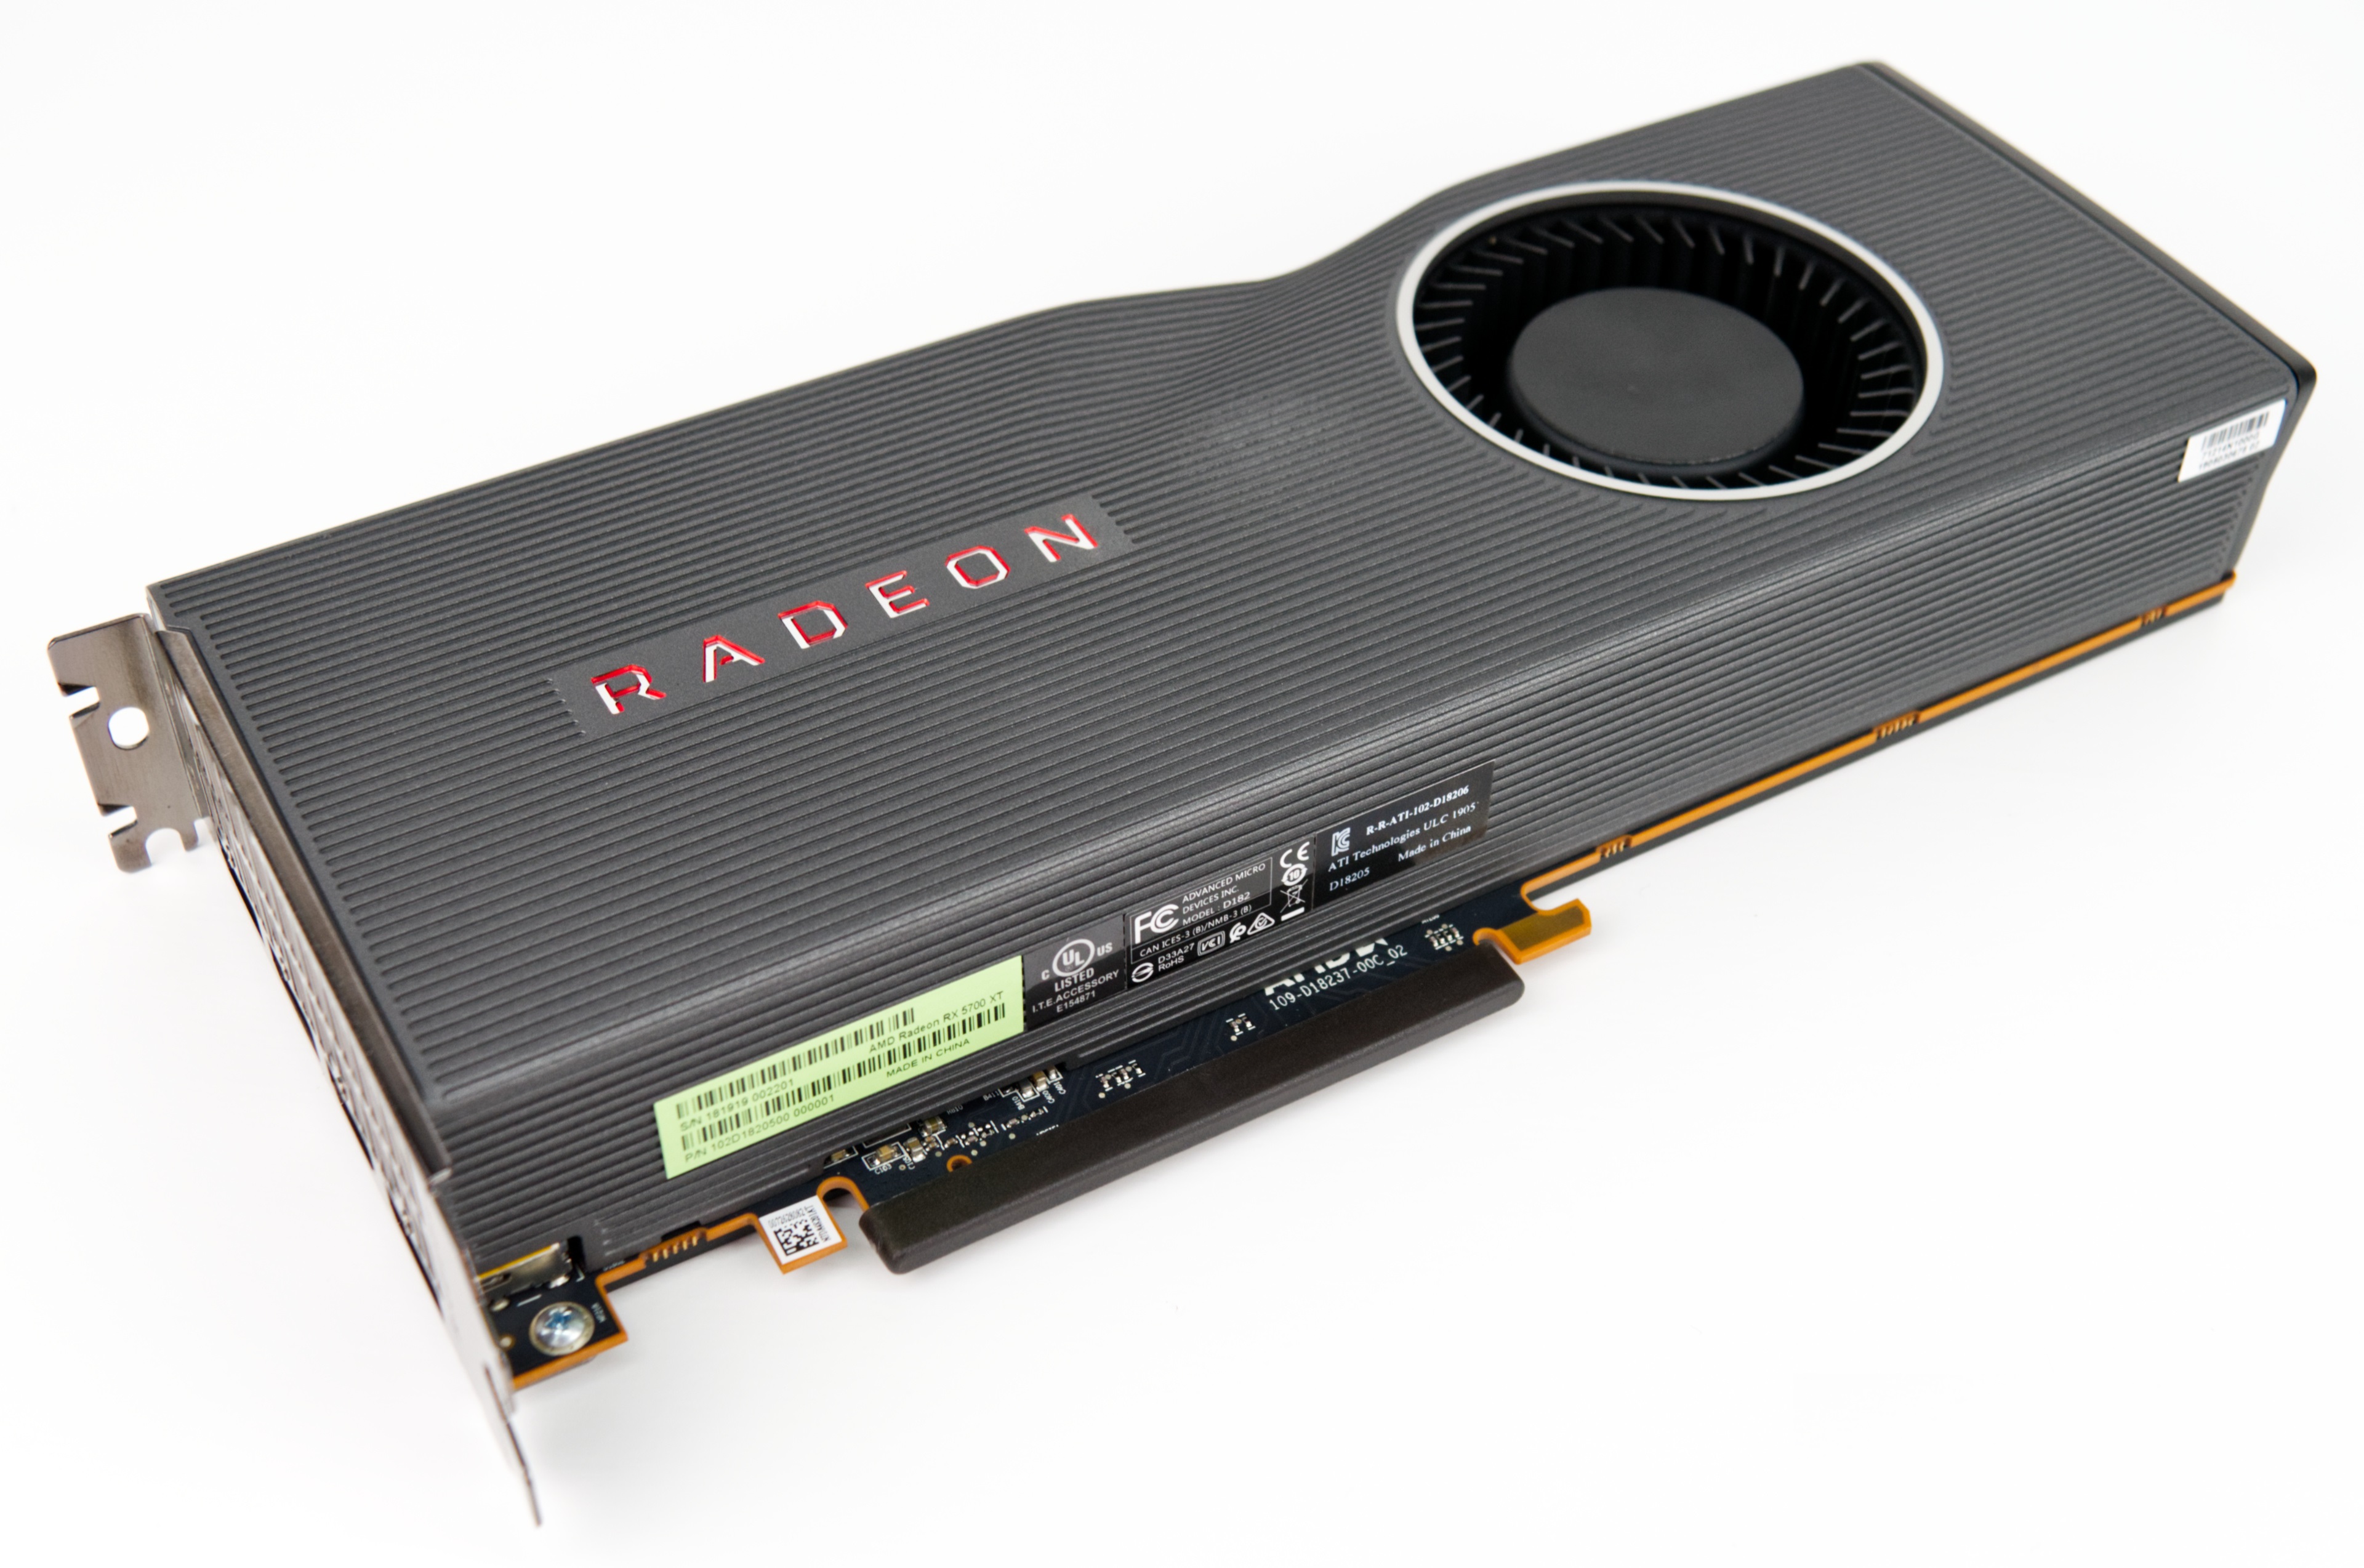 AMD Radeon RX 5700 XT Review: Known issues of the reference design ...